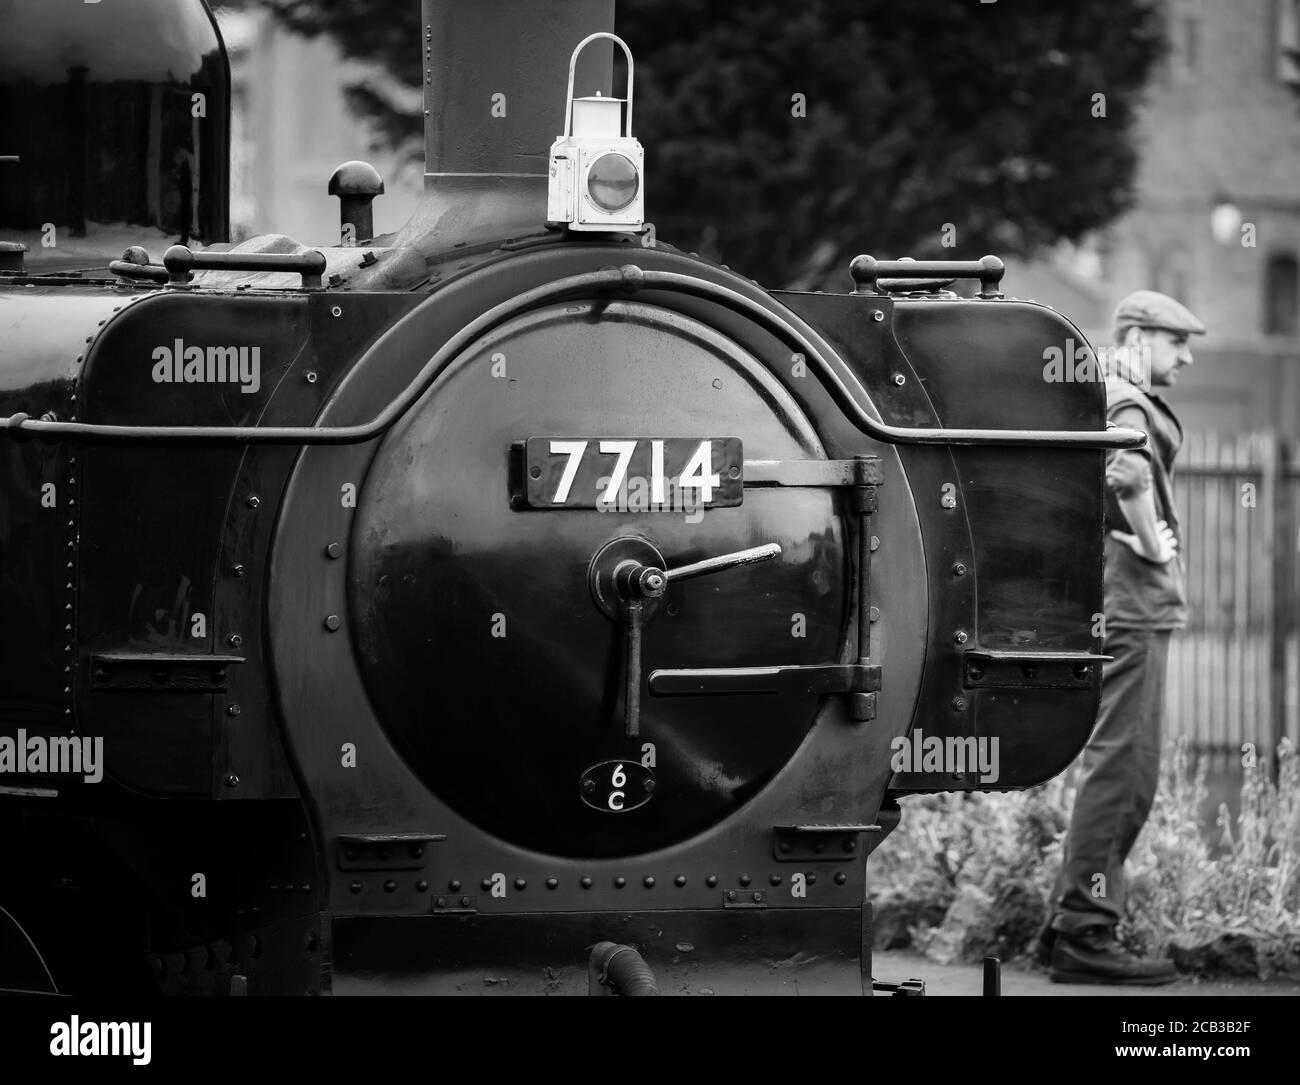 Monochrome close up of vintage UK steam locomotive front standing by platform, Severn Valley Railway Kidderminster, with waiting steam train driver. Stock Photo